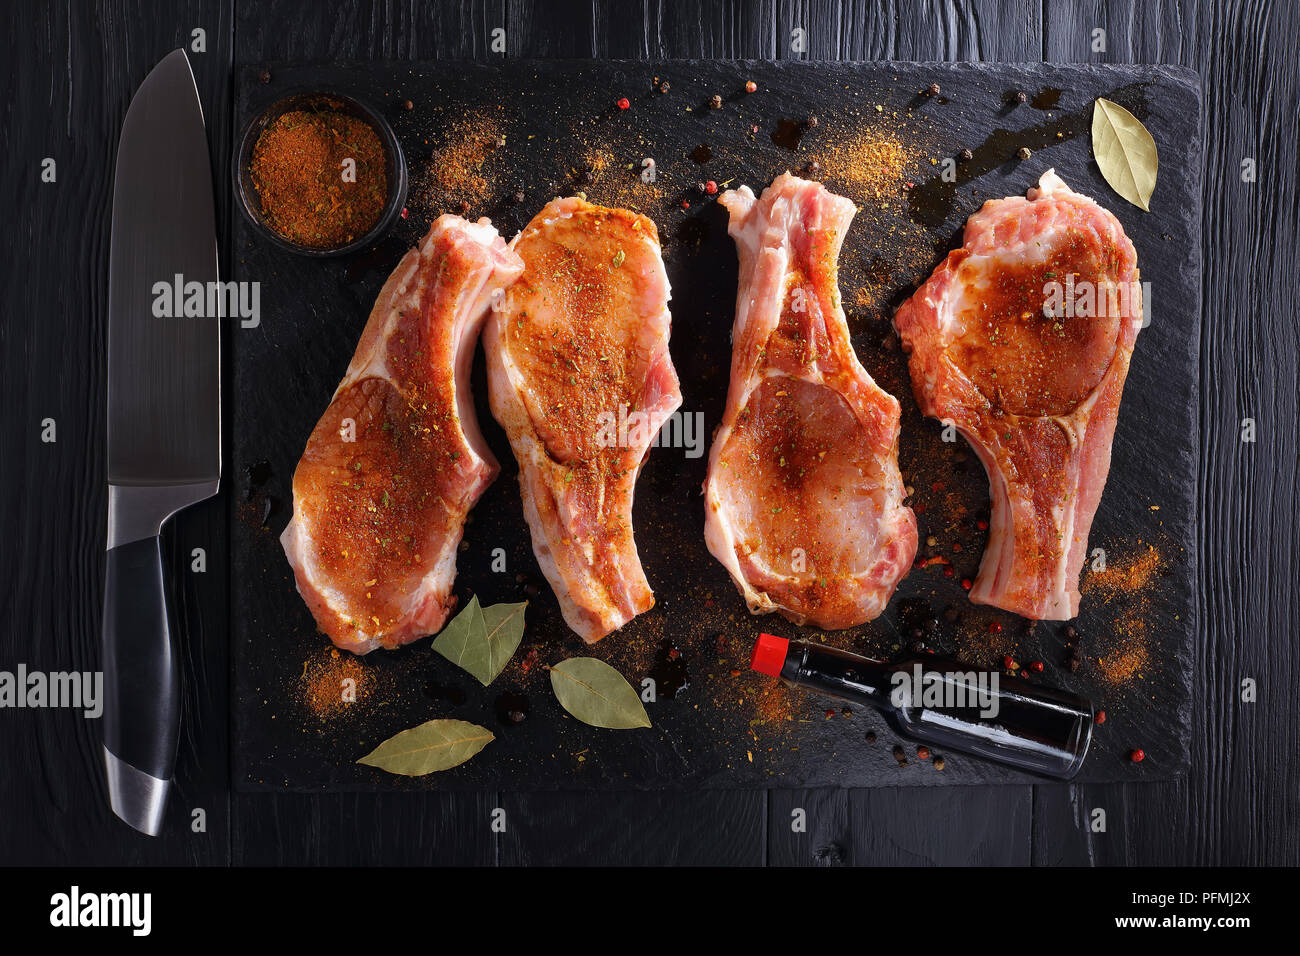 raw pork chops seasoned with spices, peppercorns and bay leaf on a black slate tray on wooden table with bottle of worcester sauce and knife, view fro Stock Photo